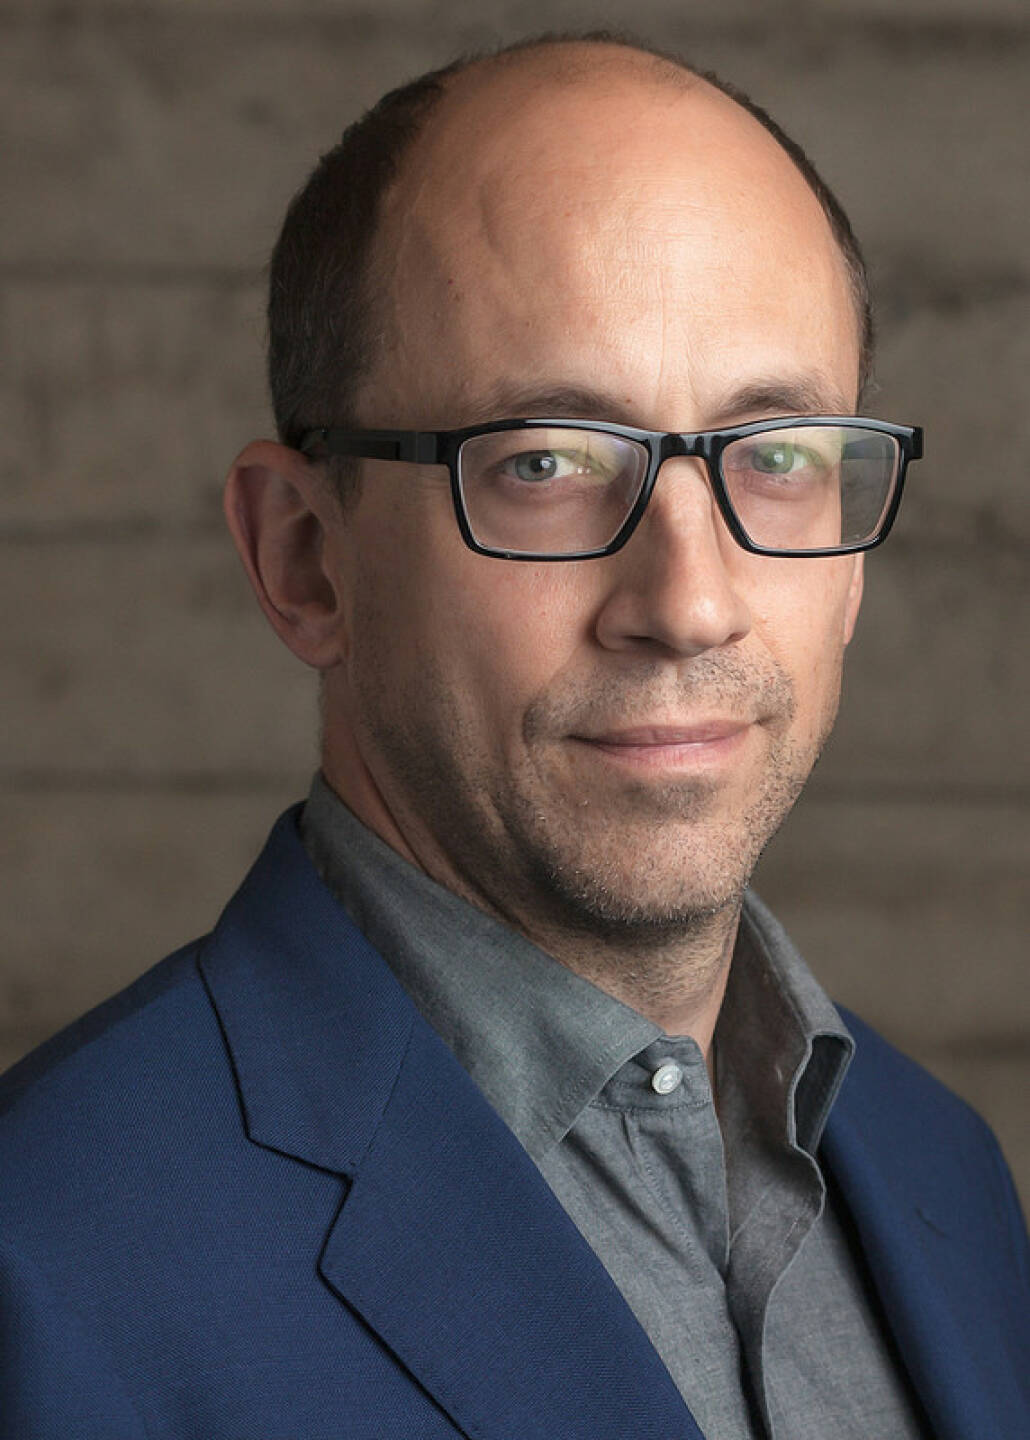 Dick Costolo, CEO Twitter, (C) Troy Holden for Twitter, Inc